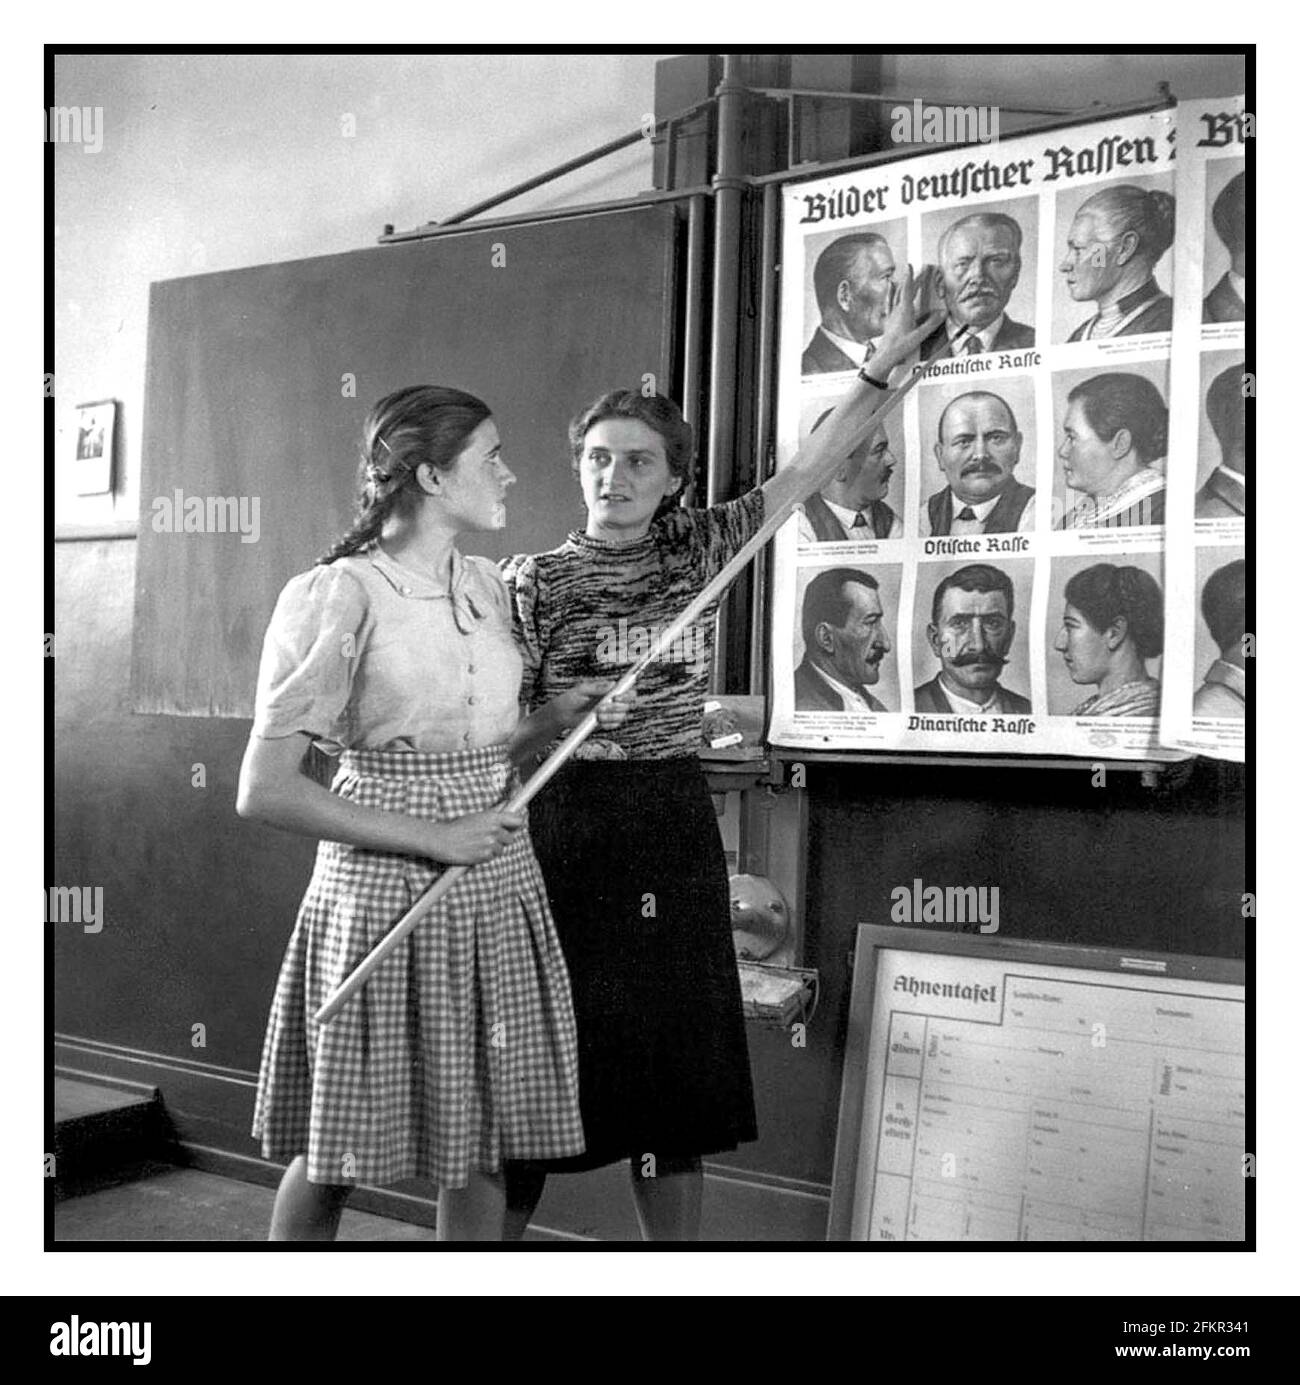 Nazi Germany school education indoctrination radicalisation 1940s image of a race races education class at a school for German girls, 1943 showing poster with various German facial features which would be acceptable to the Nazi ideal. - Nazi indoctrination permeated all German family life. Education in the Third Reich served to indoctrinate students with the National Socialist world view. Nazi scholars and educators glorified Nordic and other “Aryan” races, labeling Jews and other so-called inferior peoples as ‘parasitic races incapable of creating culture or civilisation’. Nazi Germany Stock Photo